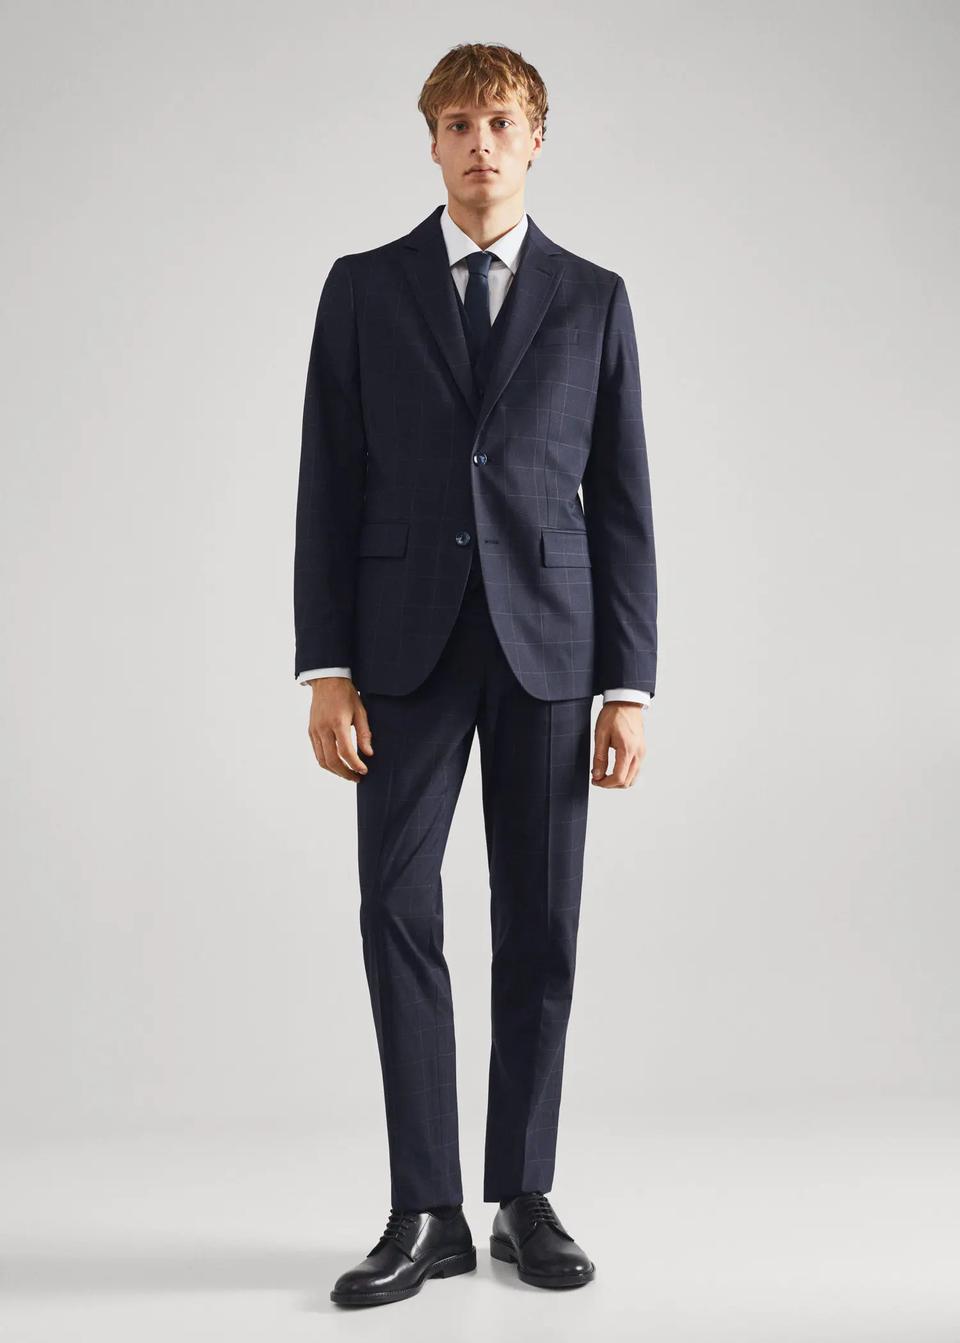 Best Checked Wedding Suits: 20 Stylish Suit Options - hitched.co.uk ...